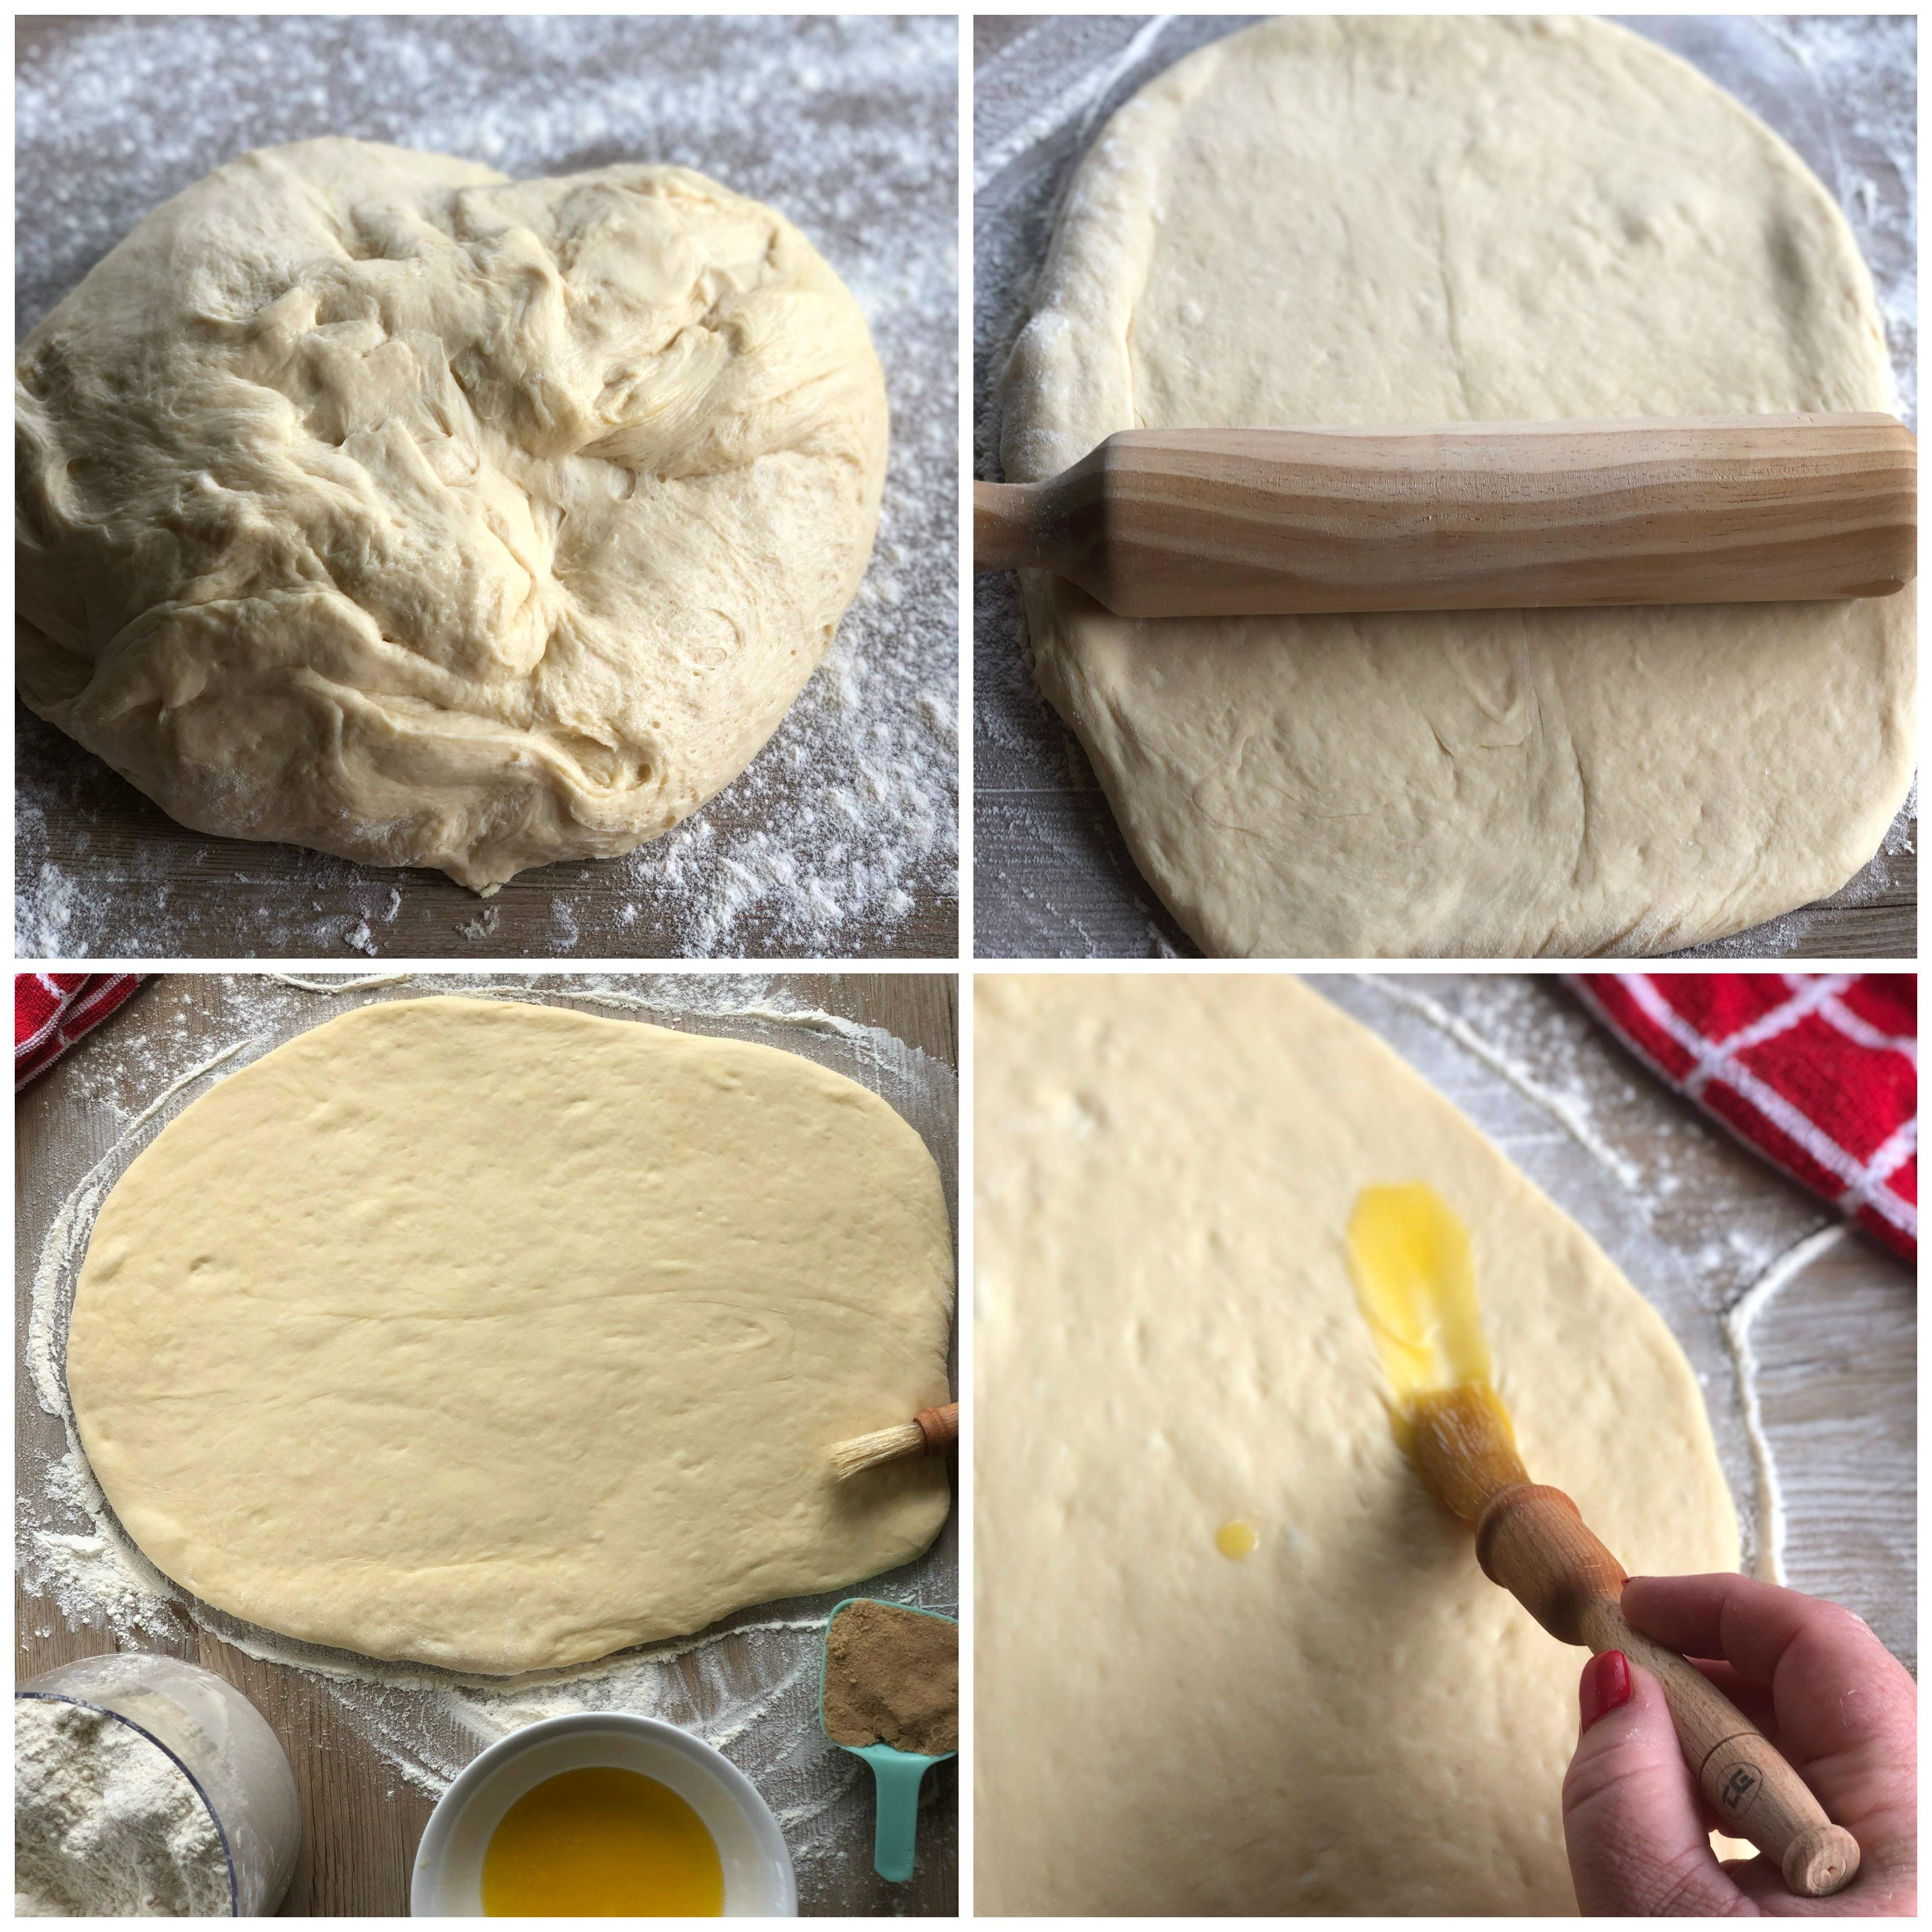 Preparing the dough for the rolls